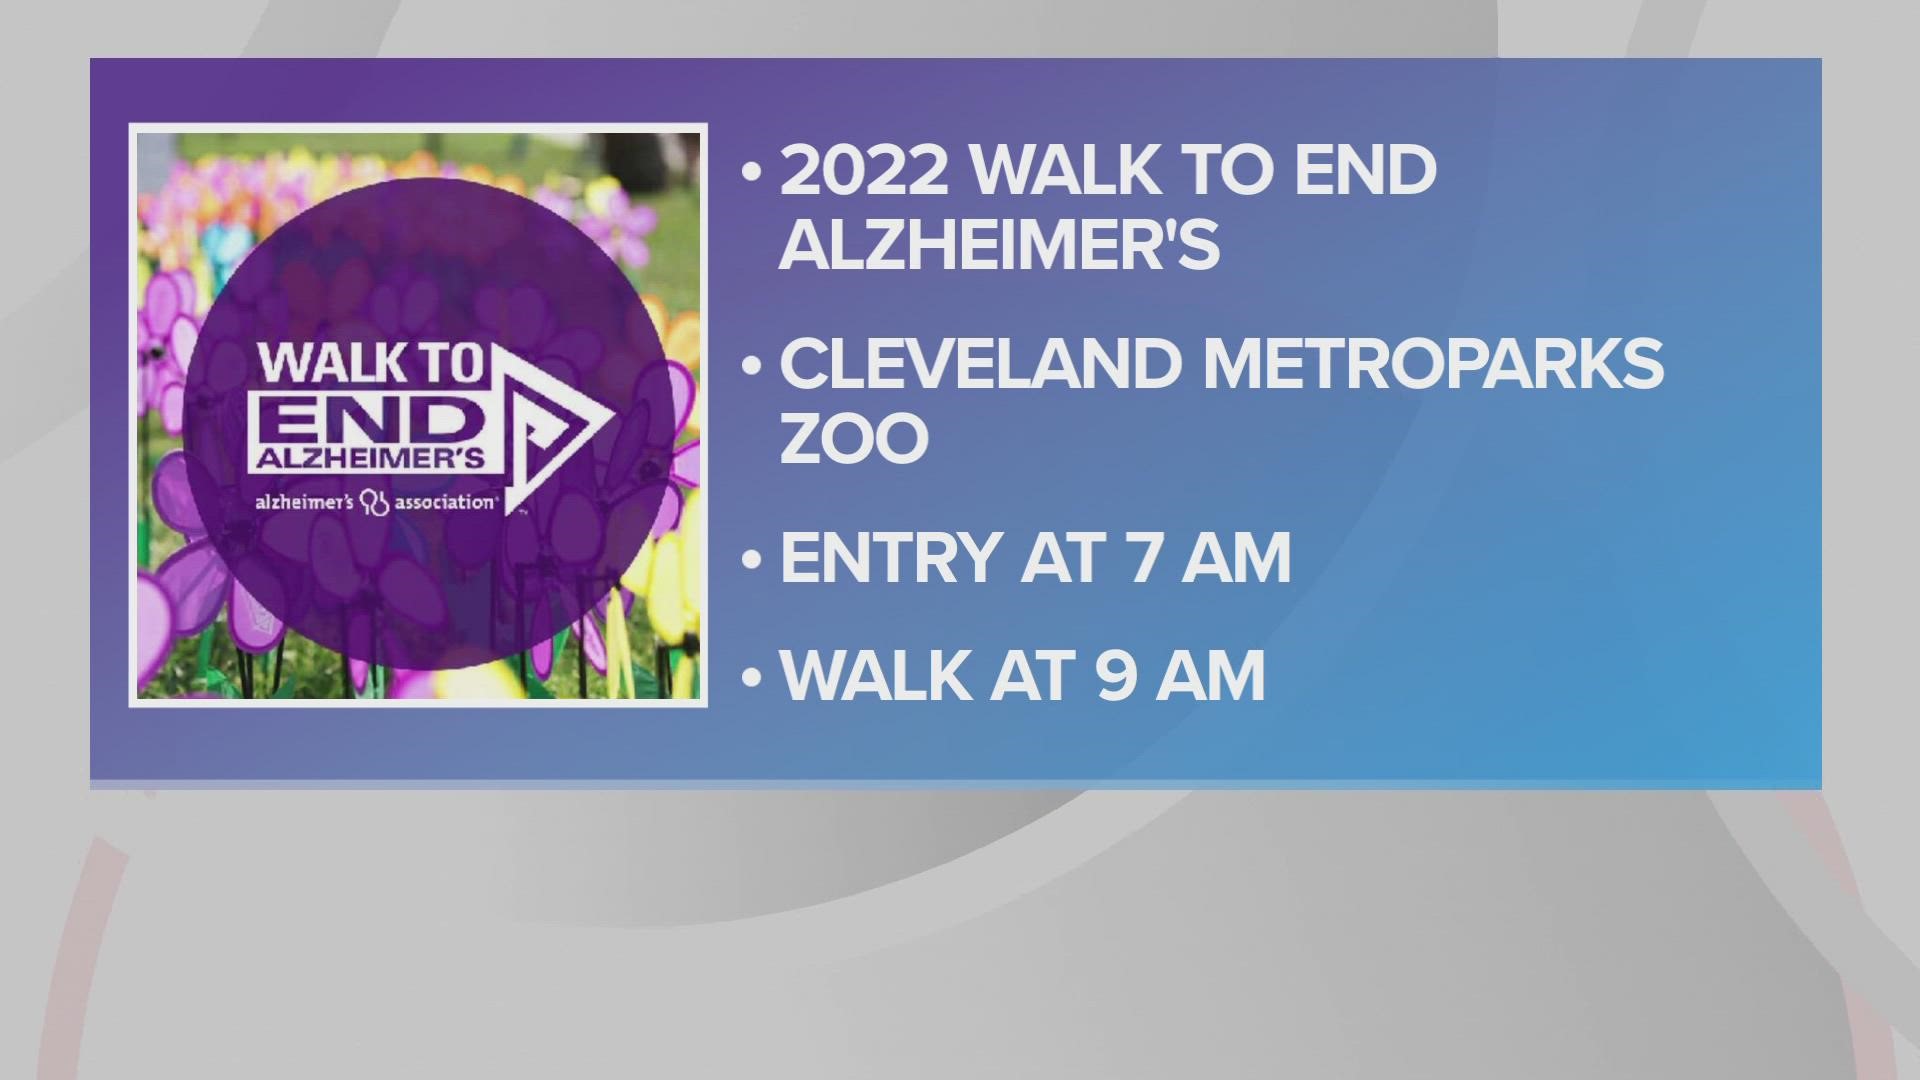 The event will take place on Sunday, October 2 at the Cleveland Metroparks Zoo.